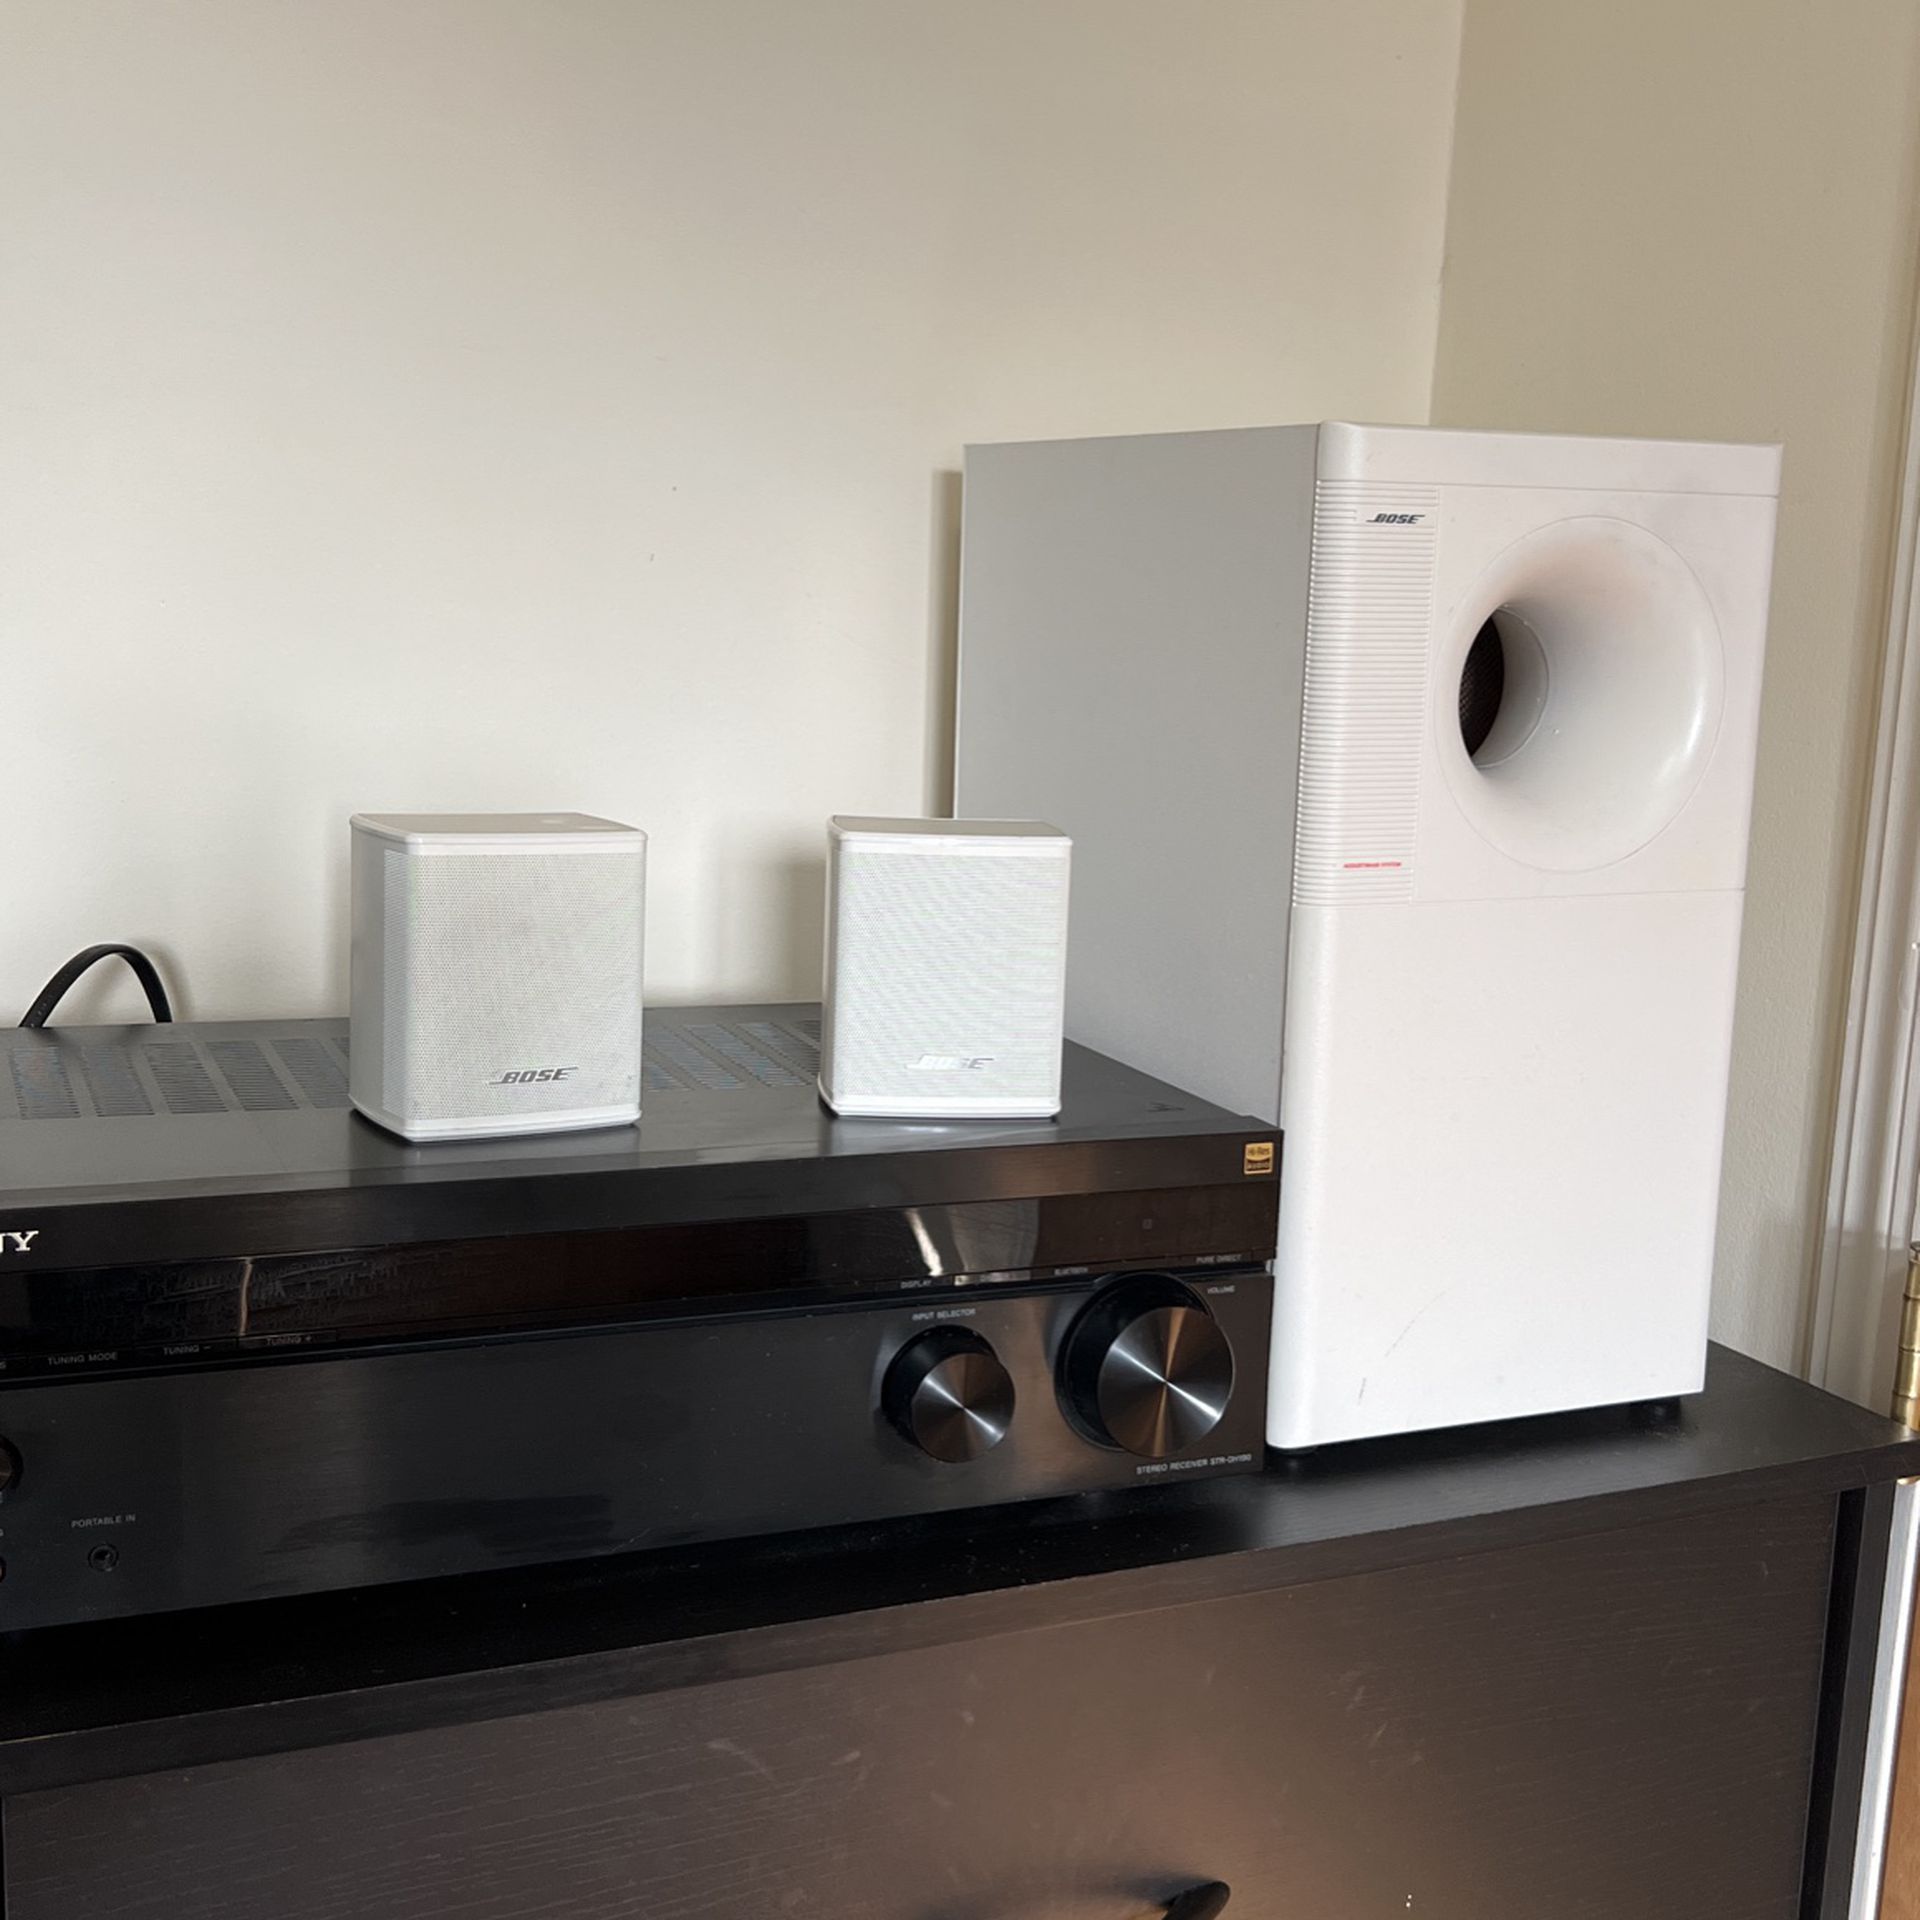 SONY + BOSE STEREO SOUNDSYSTEM (RECEIVER + SPEAKERS + SUBWOOFER)